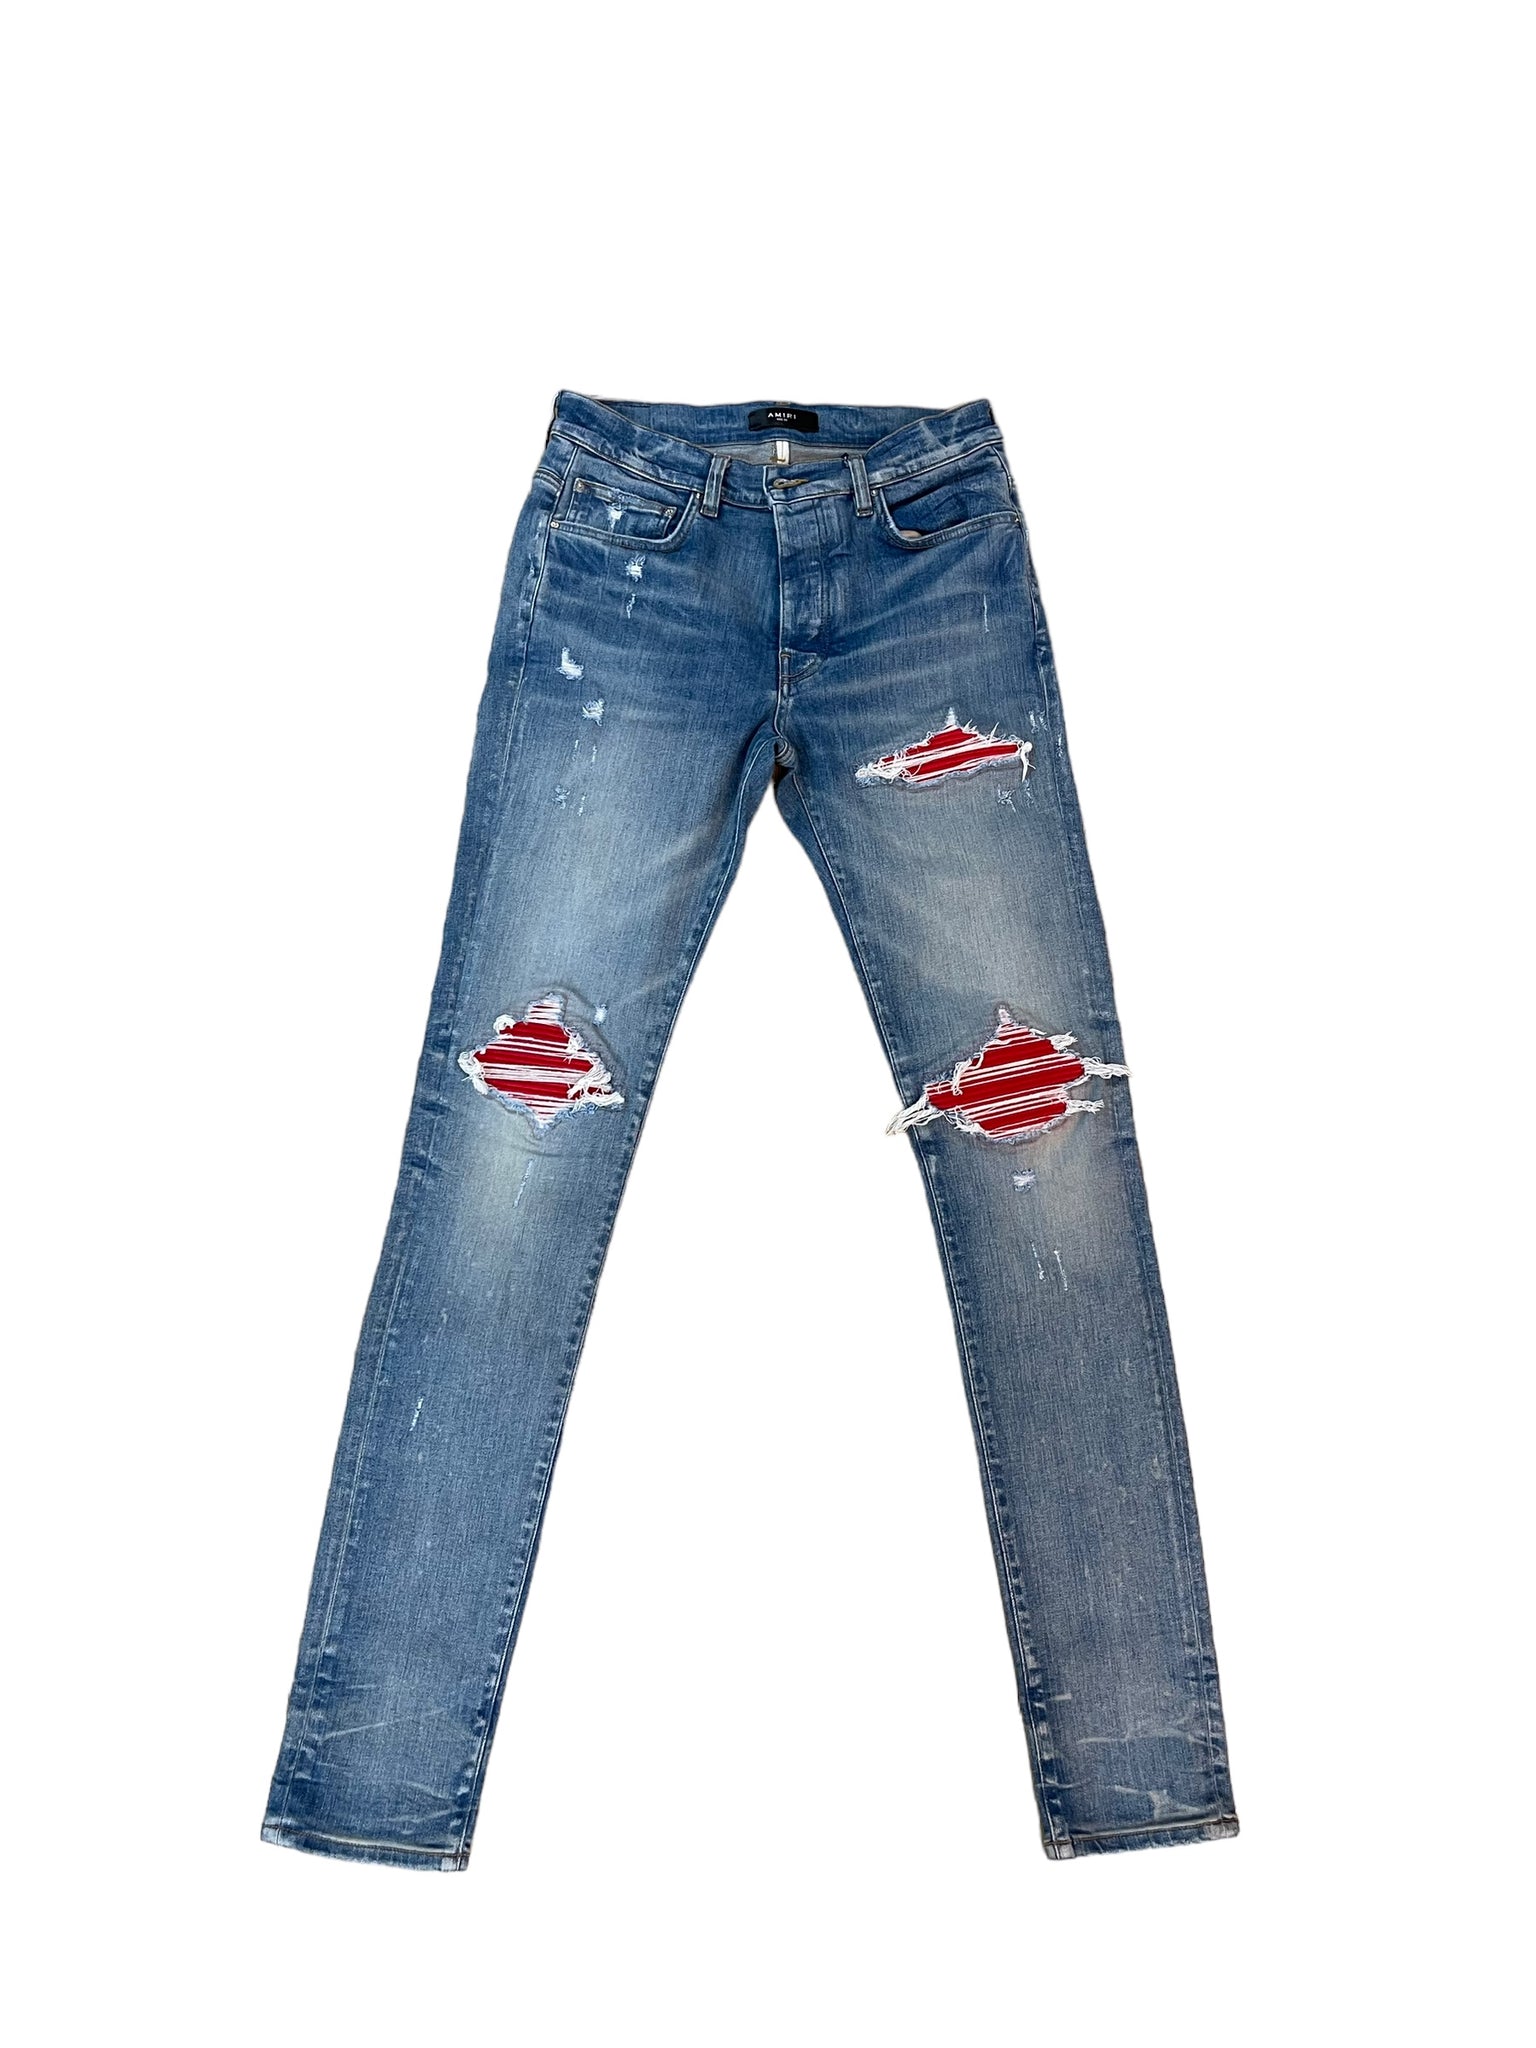 Amiri MX1 Red Ribbed Jeans "Light Wash"